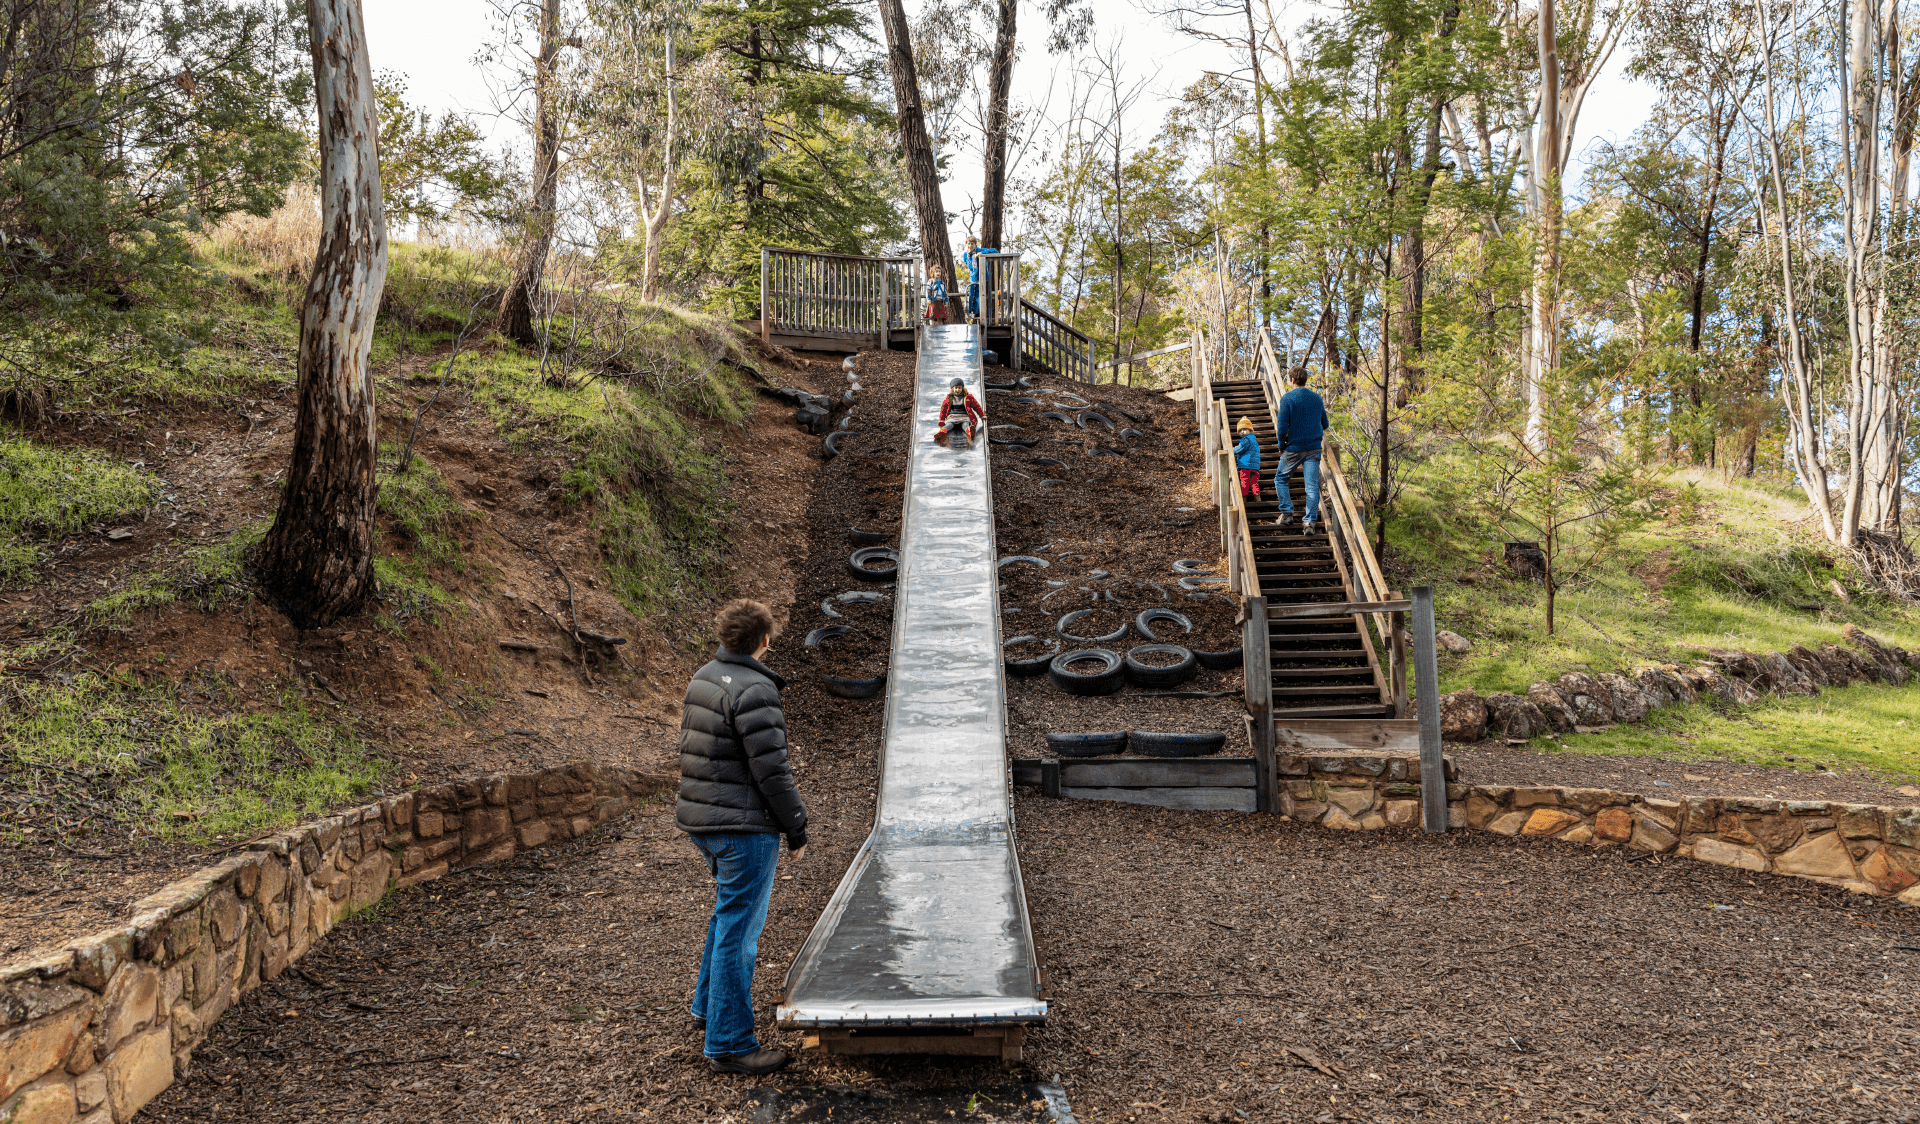 A giant slide in the playscape at Vaughan Springs, Castlemaine Diggings National Heritage Park